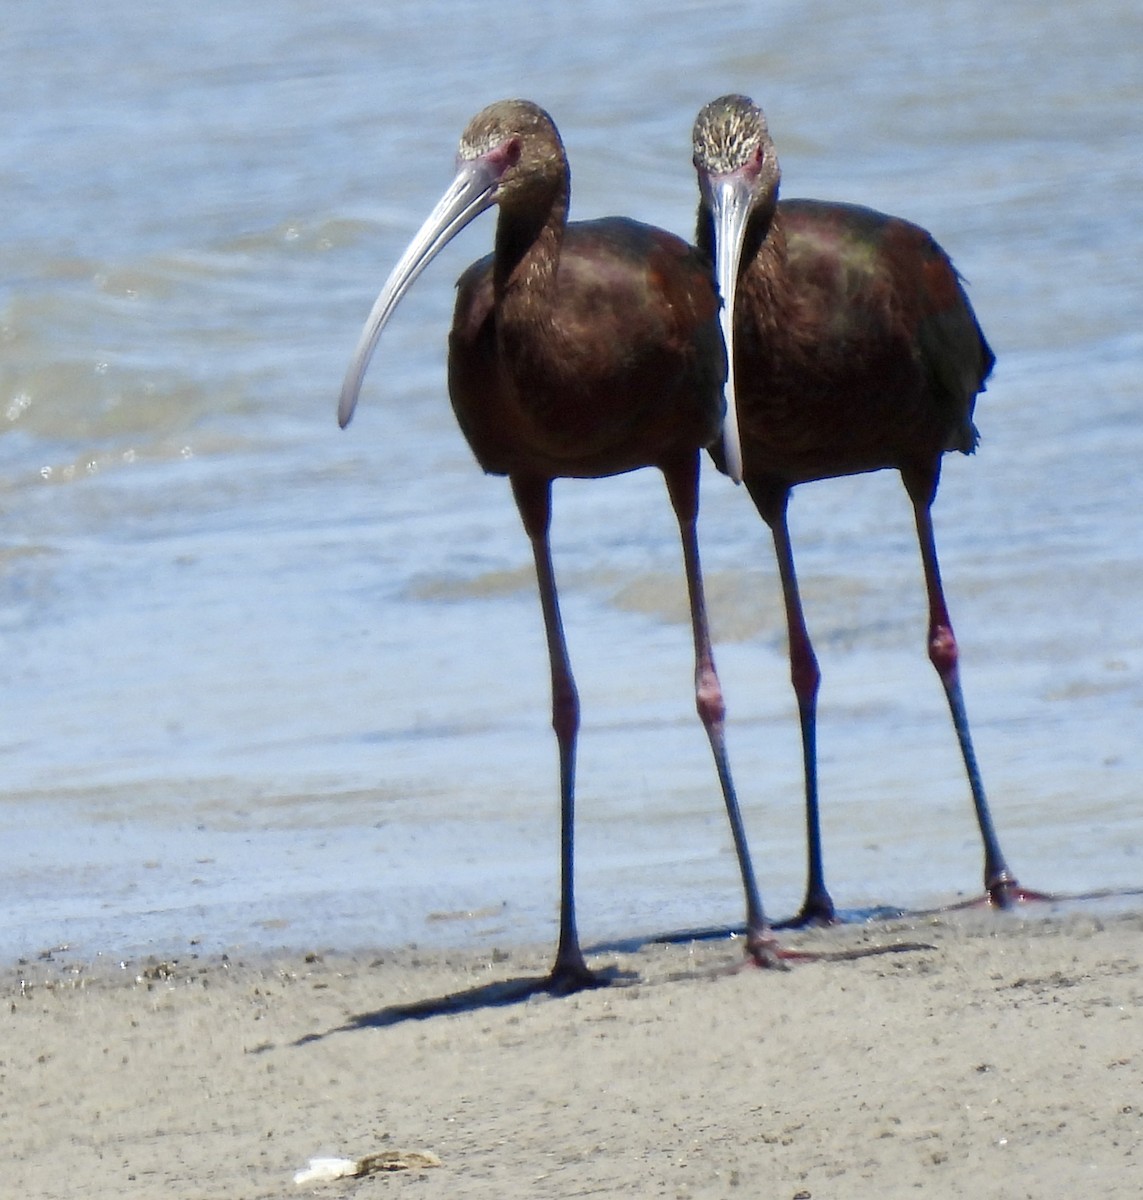 White-faced Ibis - Christopher Daniels